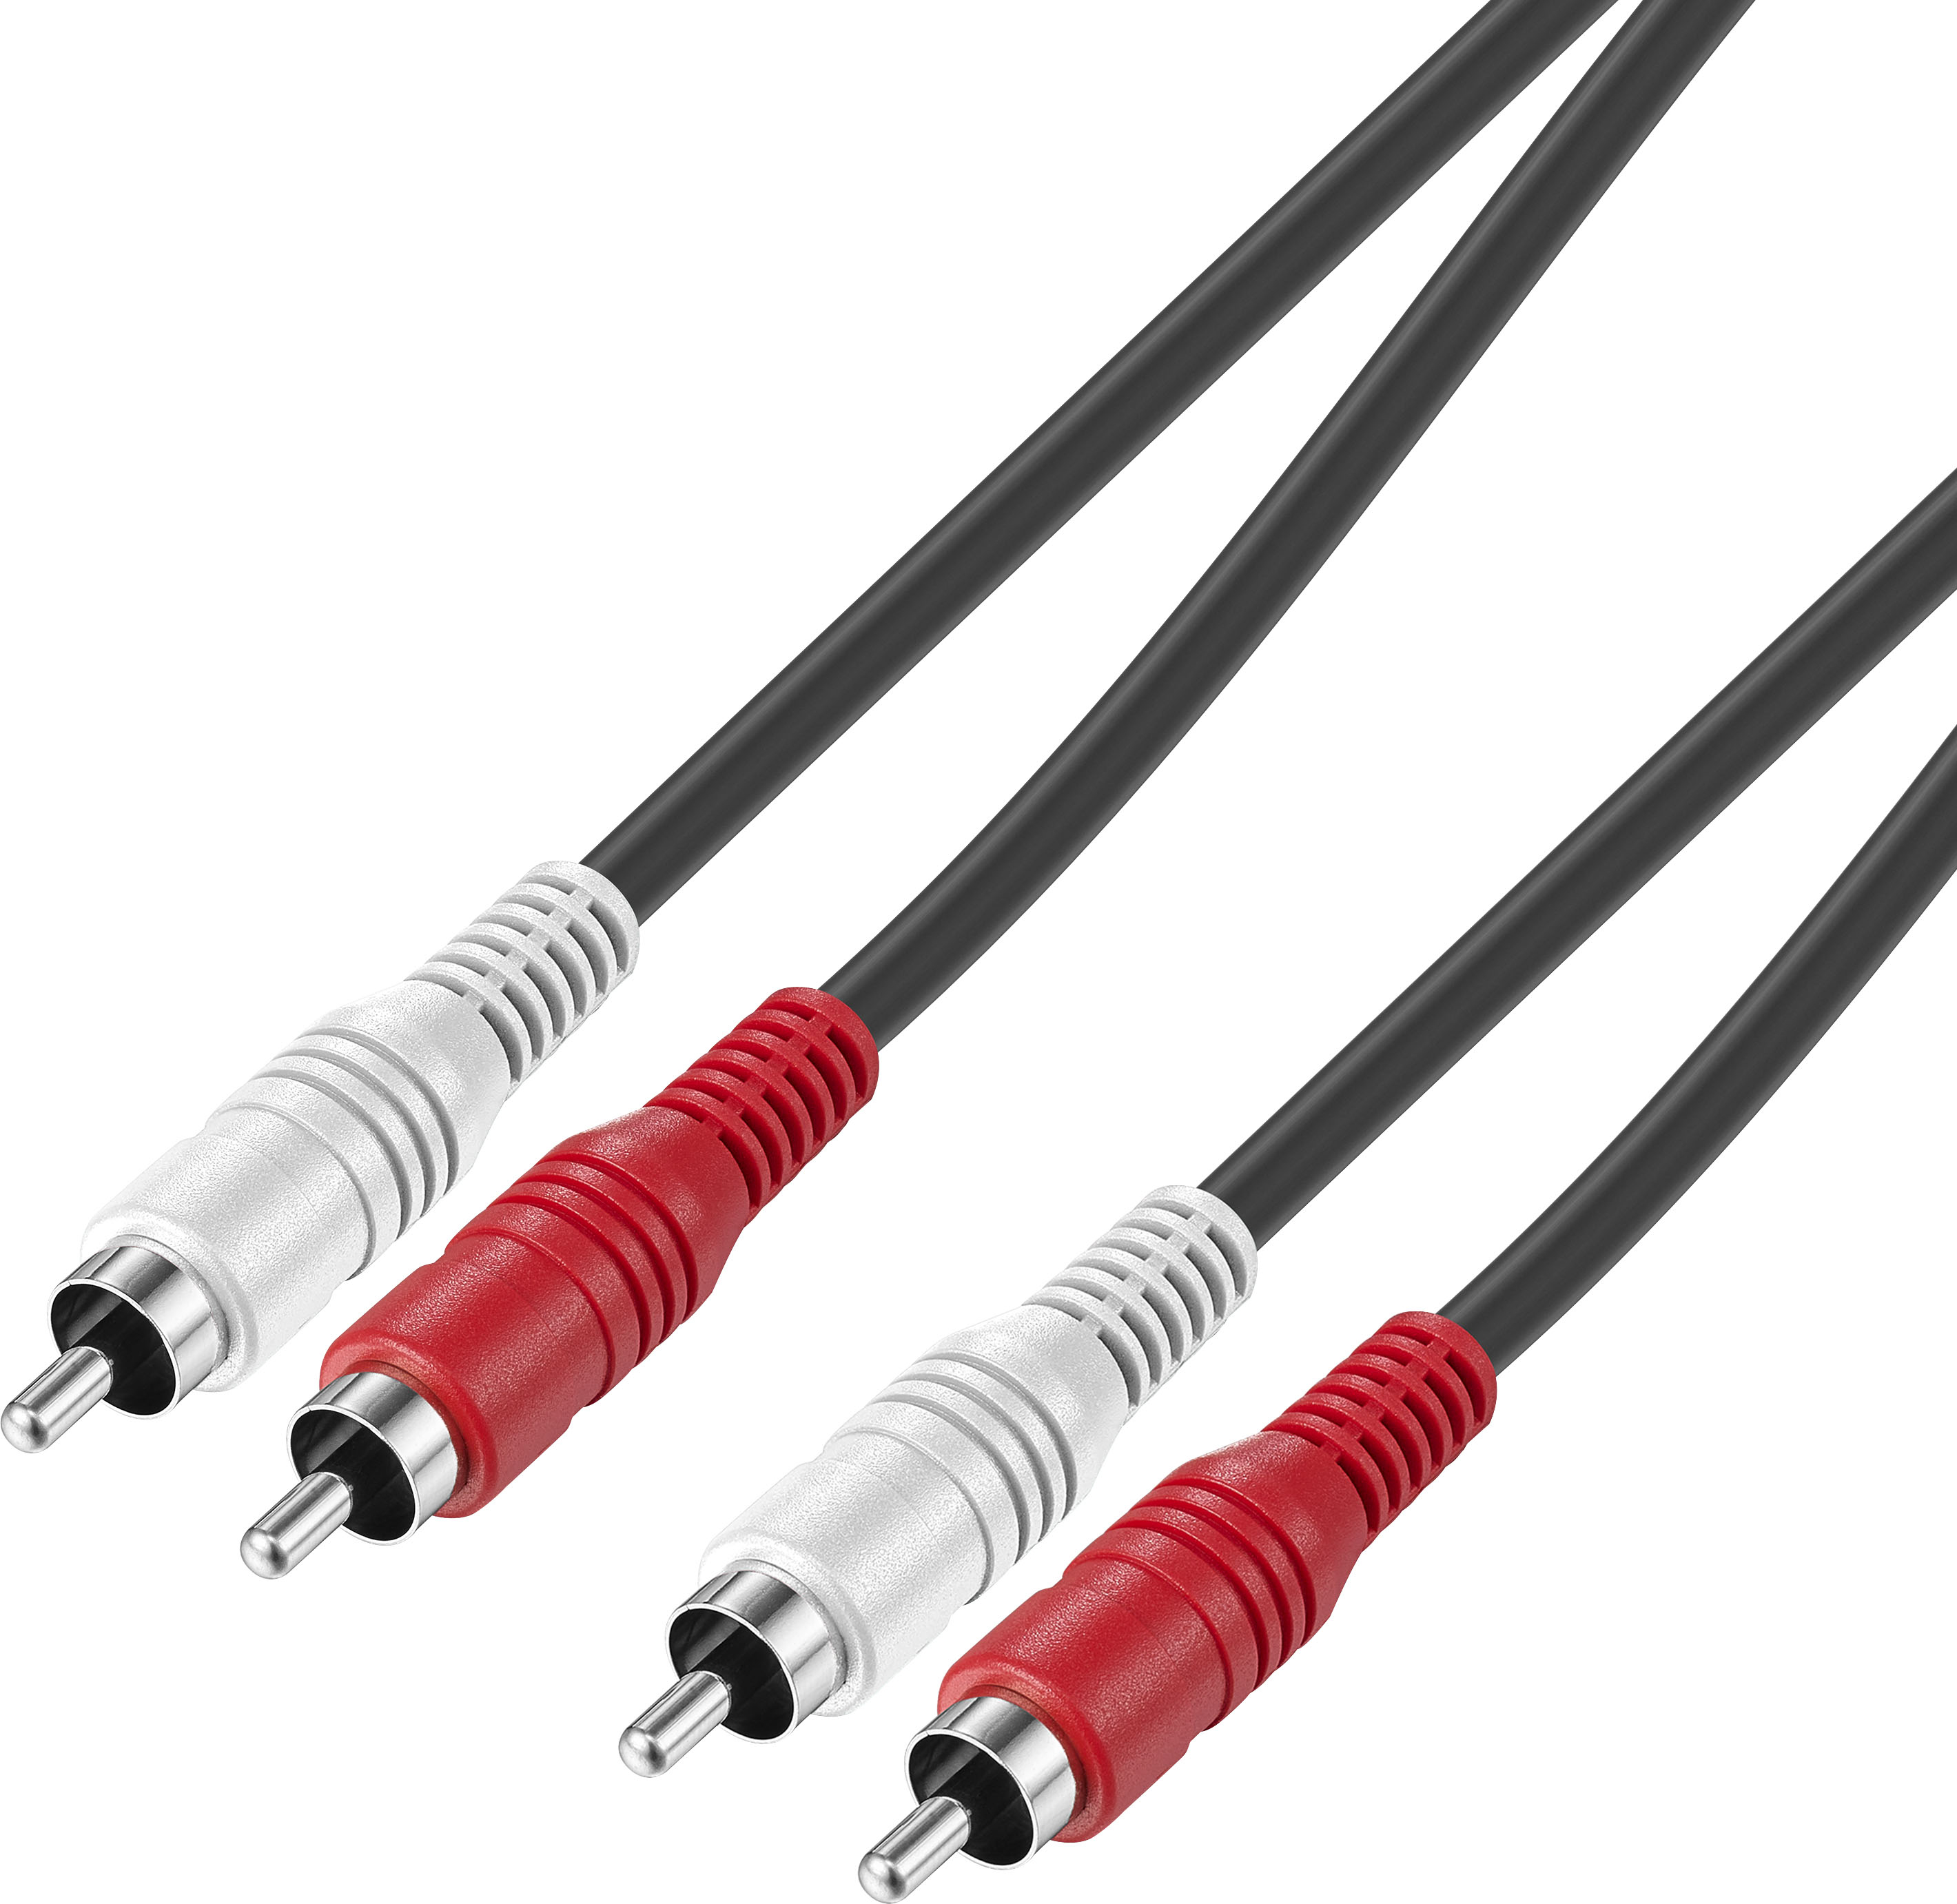 Best Buy essentials™ 12' Stereo Audio RCA Cable Black BE-HCL323